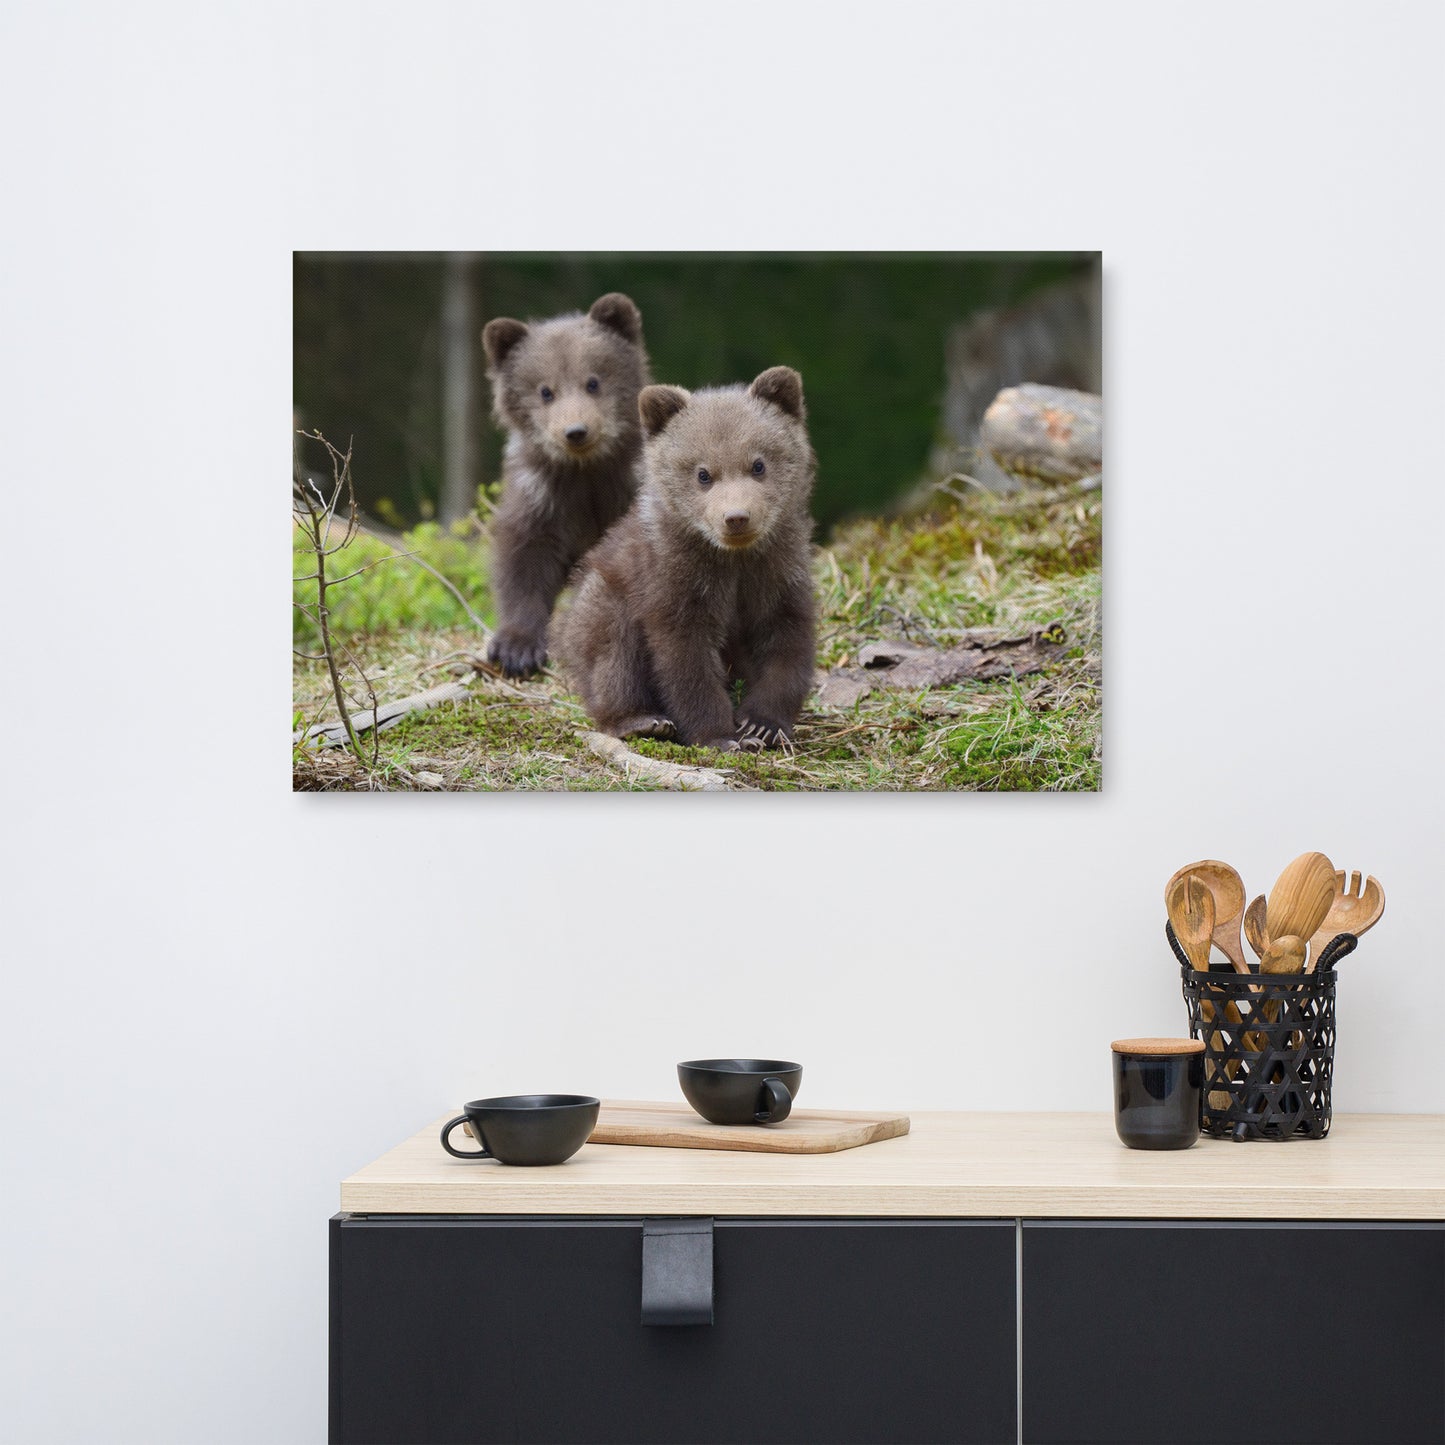 Nursery Wall Hanging Decor: Adorable Cubs In The Trees - Wildlife / Animal / Nature Photograph Canvas Wall Art Print - Artwork